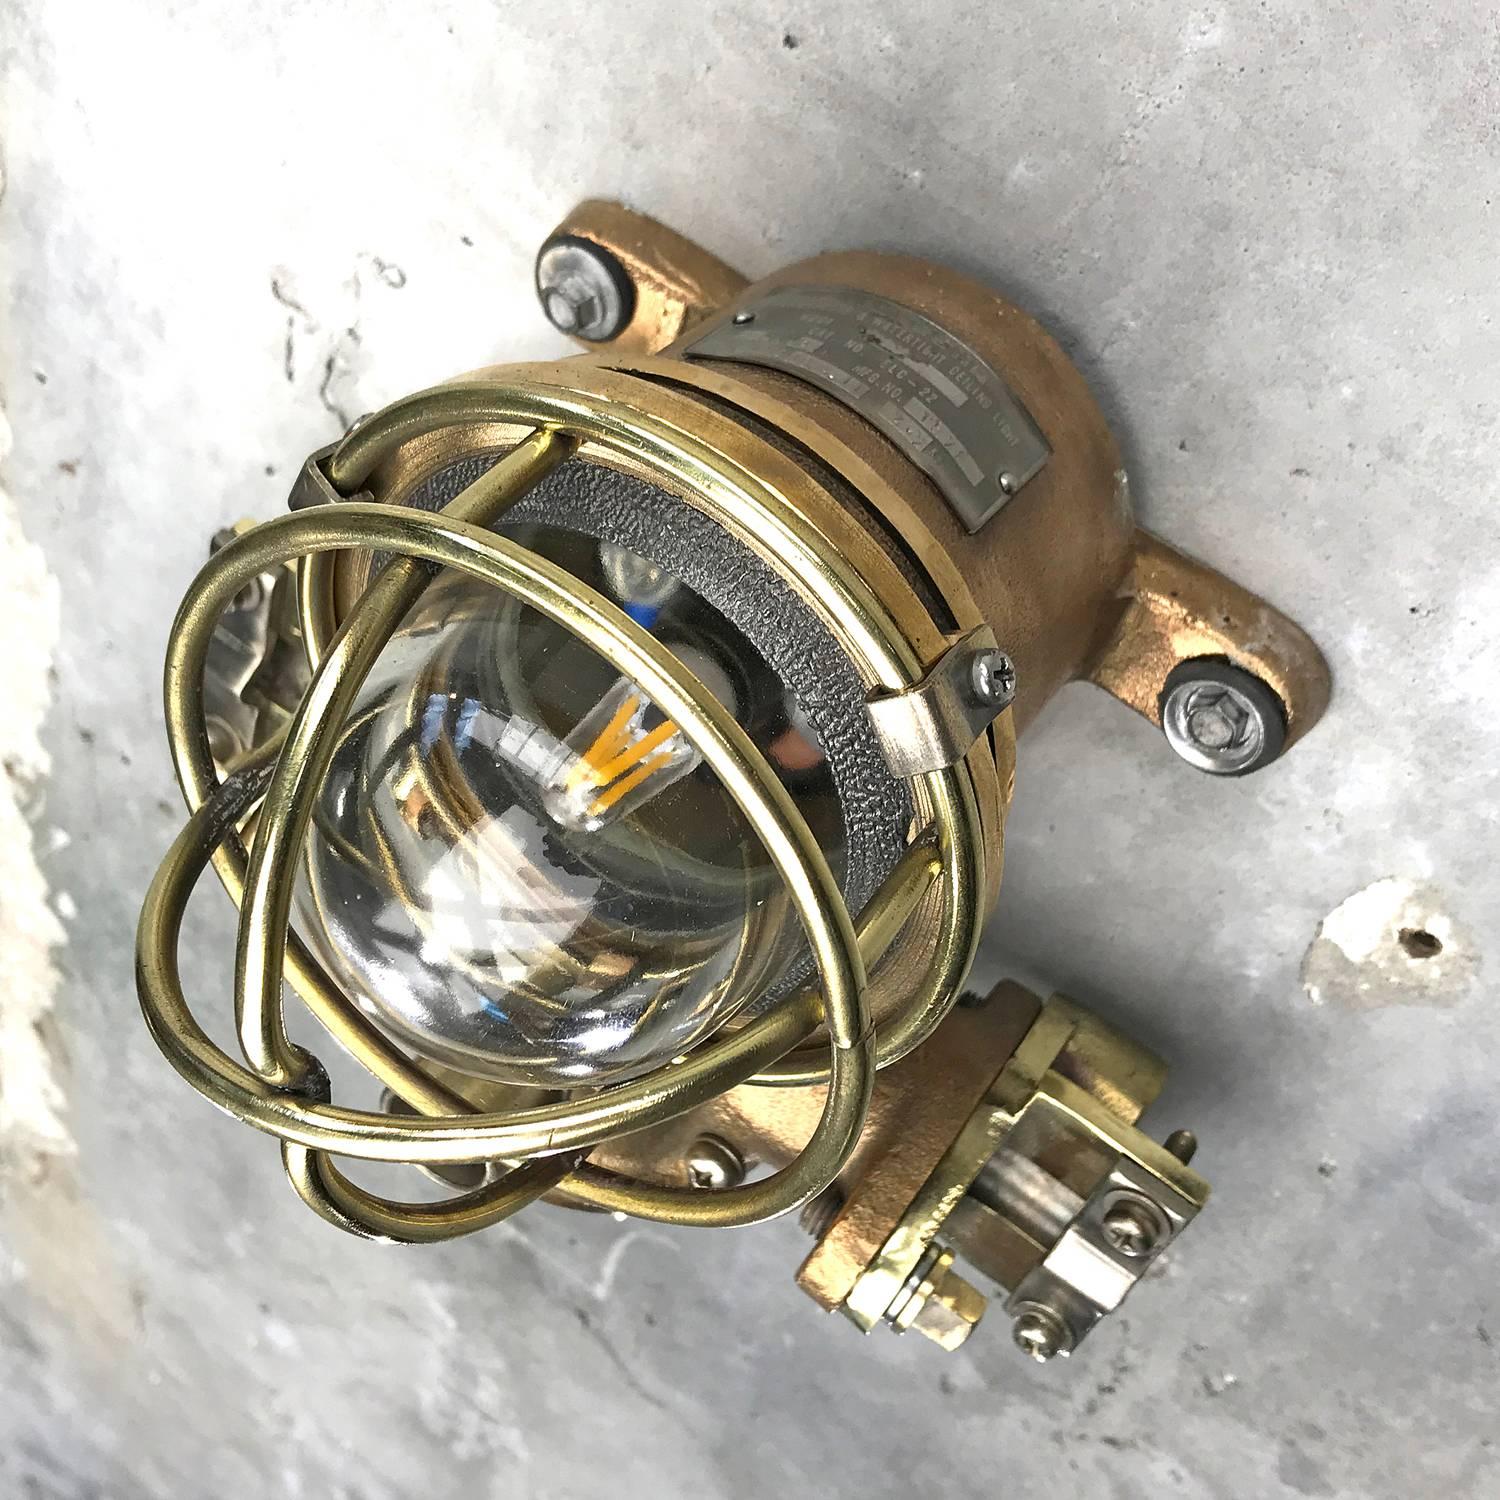 1980s Cast Bronze Flame Proof Water Tight Wall Light, Glass Dome Brass Cage E12 12